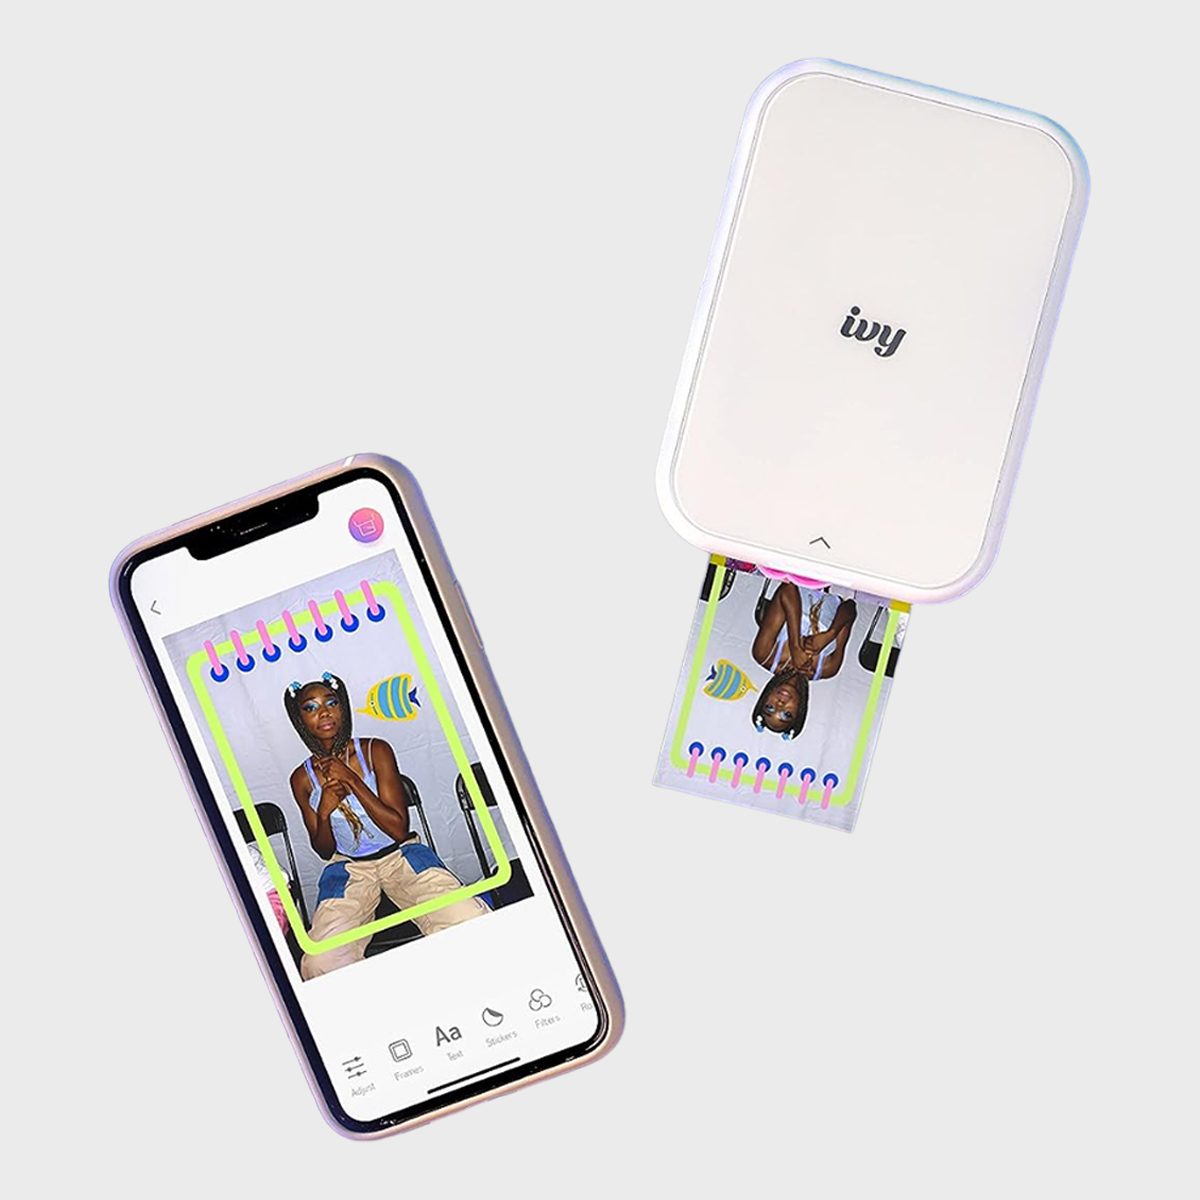 <p>If she has a smartphone, she'll love having this <a href="https://www.amazon.com/Canon-Printer-Compatible-Android-Sticky-Back/dp/B0BGM5WRQ1" rel="noopener noreferrer">mini photo printer</a> close by. It allows her to print pictures instantly using the Canon Mini Print app. She can even customize photos with borders, stickers and filters. The best part? There are no ink cartridges to buy.</p> <p>Photos are printed on Zink photo paper which has a sticky back, so she can hang or stick her favorite pics wherever she wants. It makes a handy <a href="https://www.rd.com/list/gifts-for-photographers/">gift for any budding photographer</a>.</p> <p class="listicle-page__cta-button-shop"><a class="shop-btn" href="https://www.amazon.com/Canon-Printer-Compatible-Android-Sticky-Back/dp/B0BGM5WRQ1/">Shop Now</a></p>